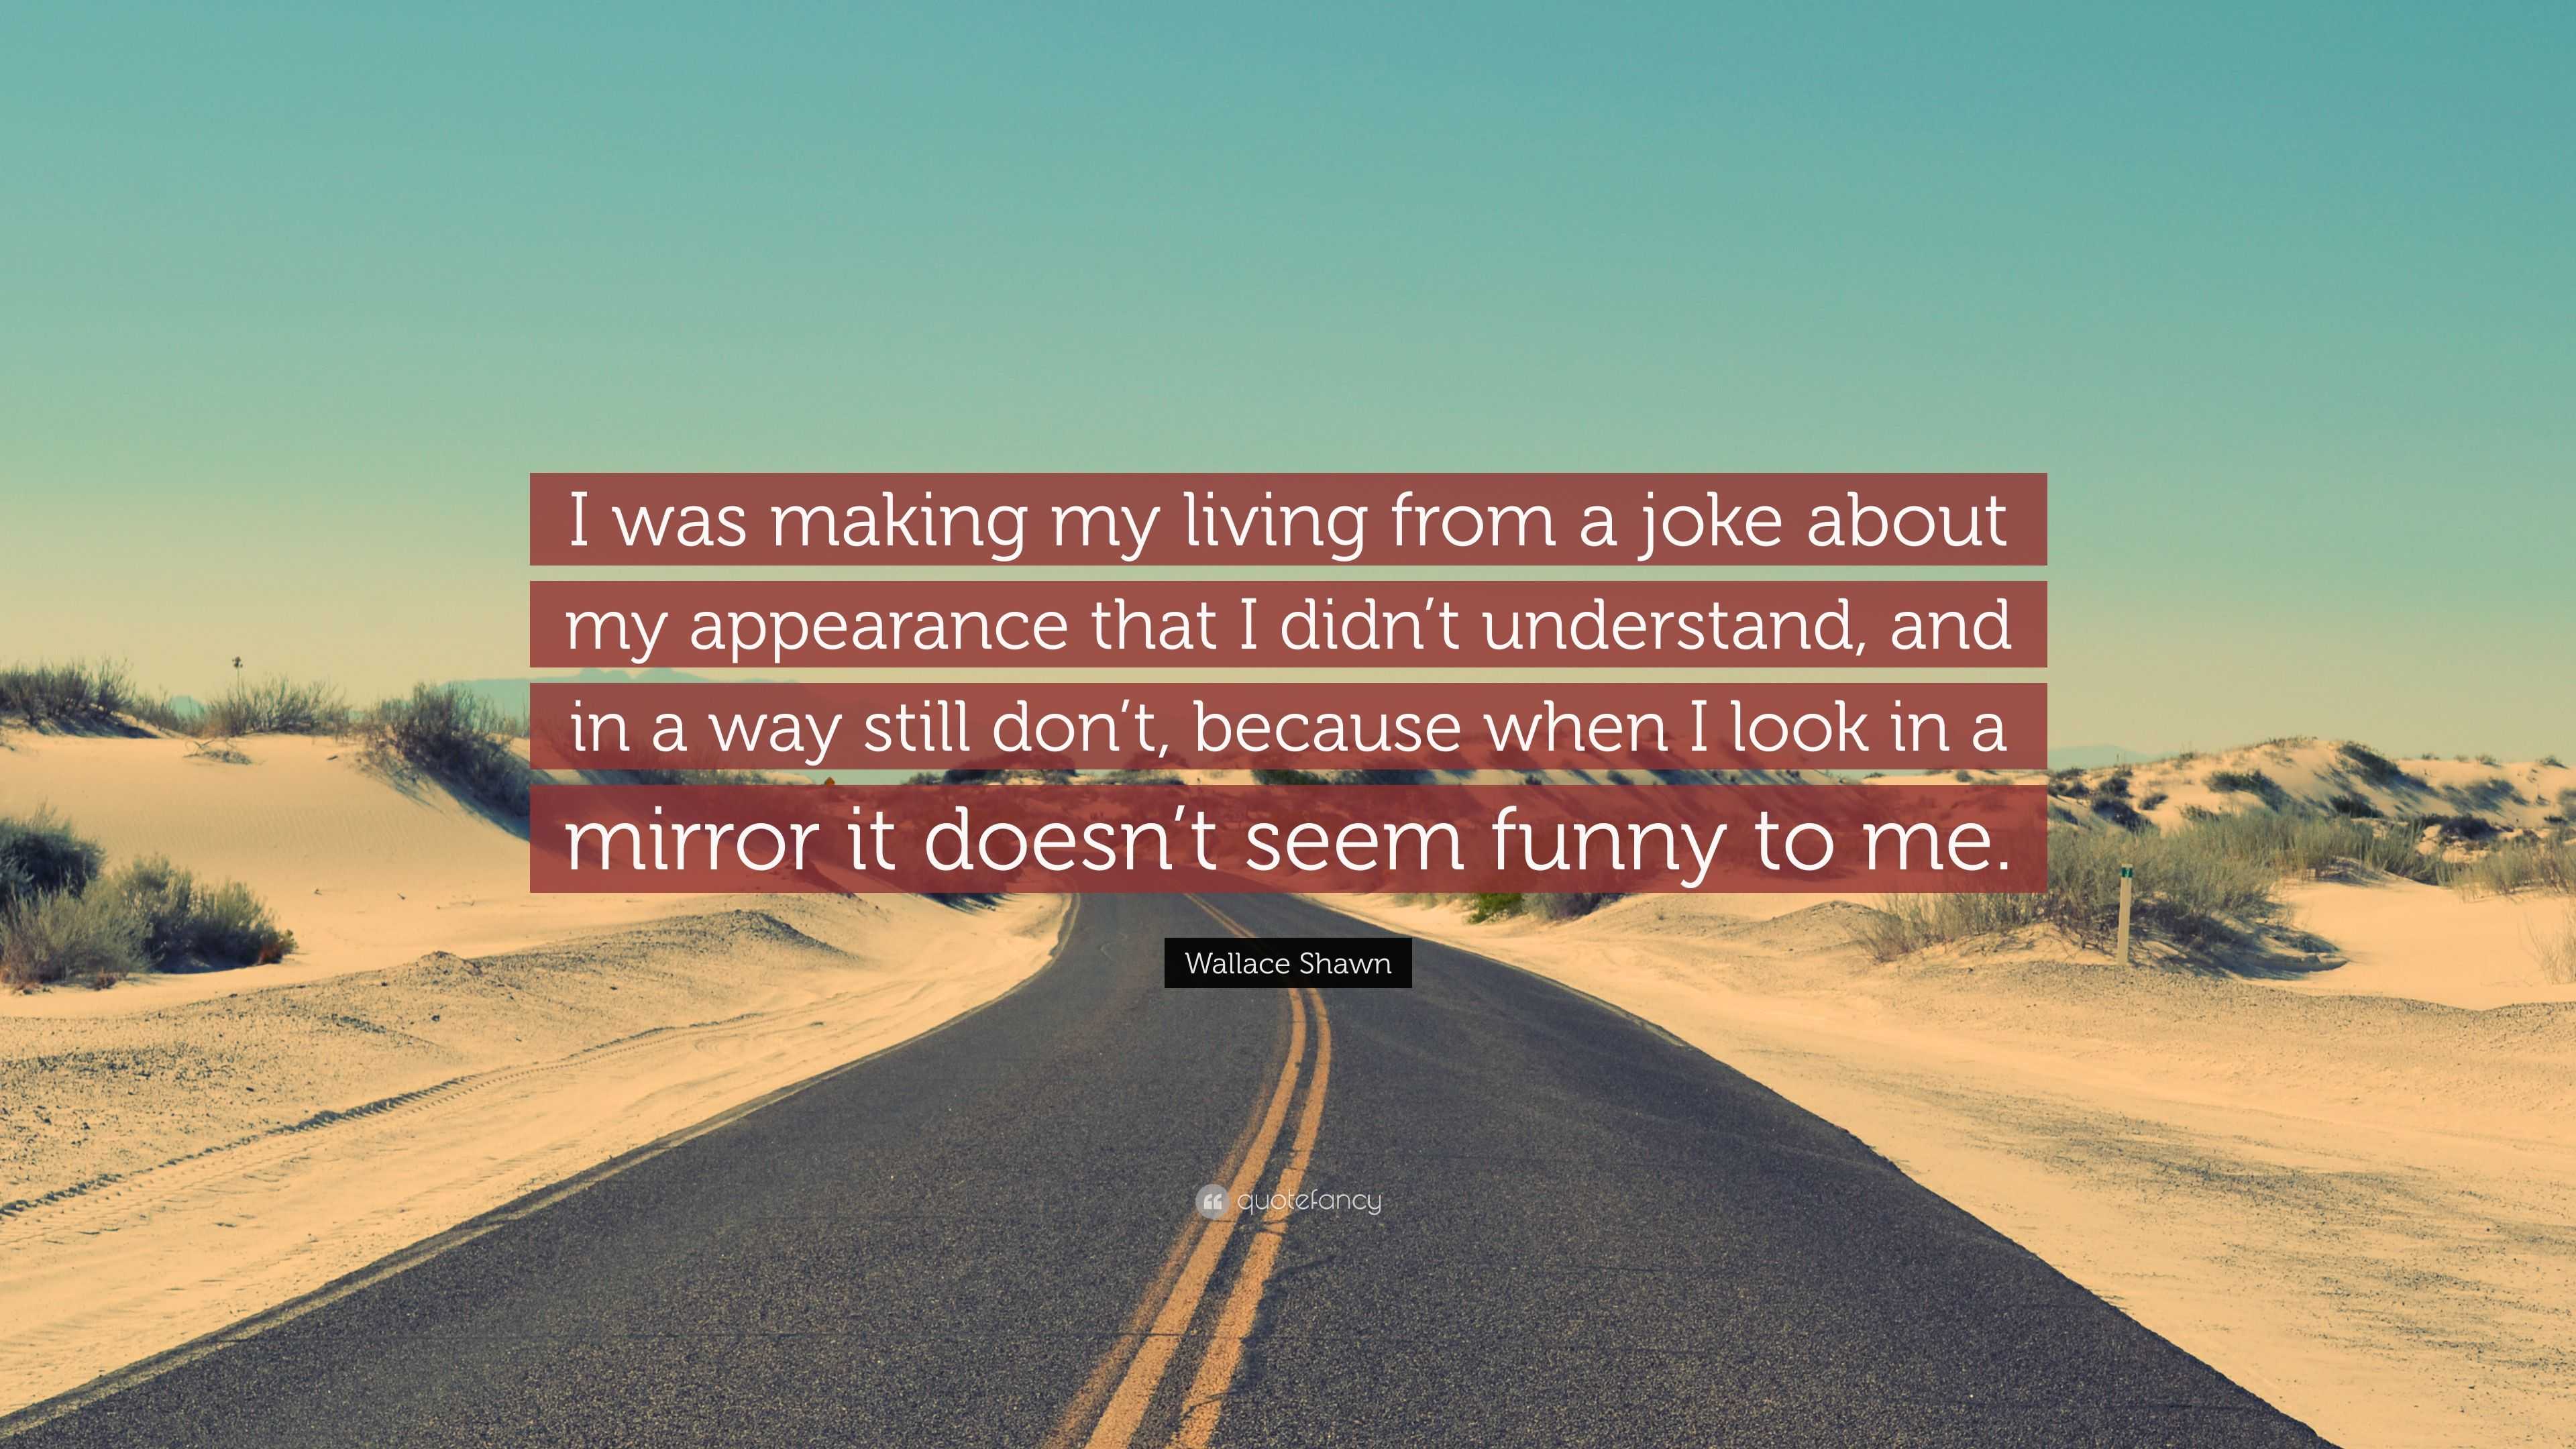 Wallace Shawn Quote: “I was making my living from a joke about my appearance  that I didn't understand, and in a way still don't, because when ...”